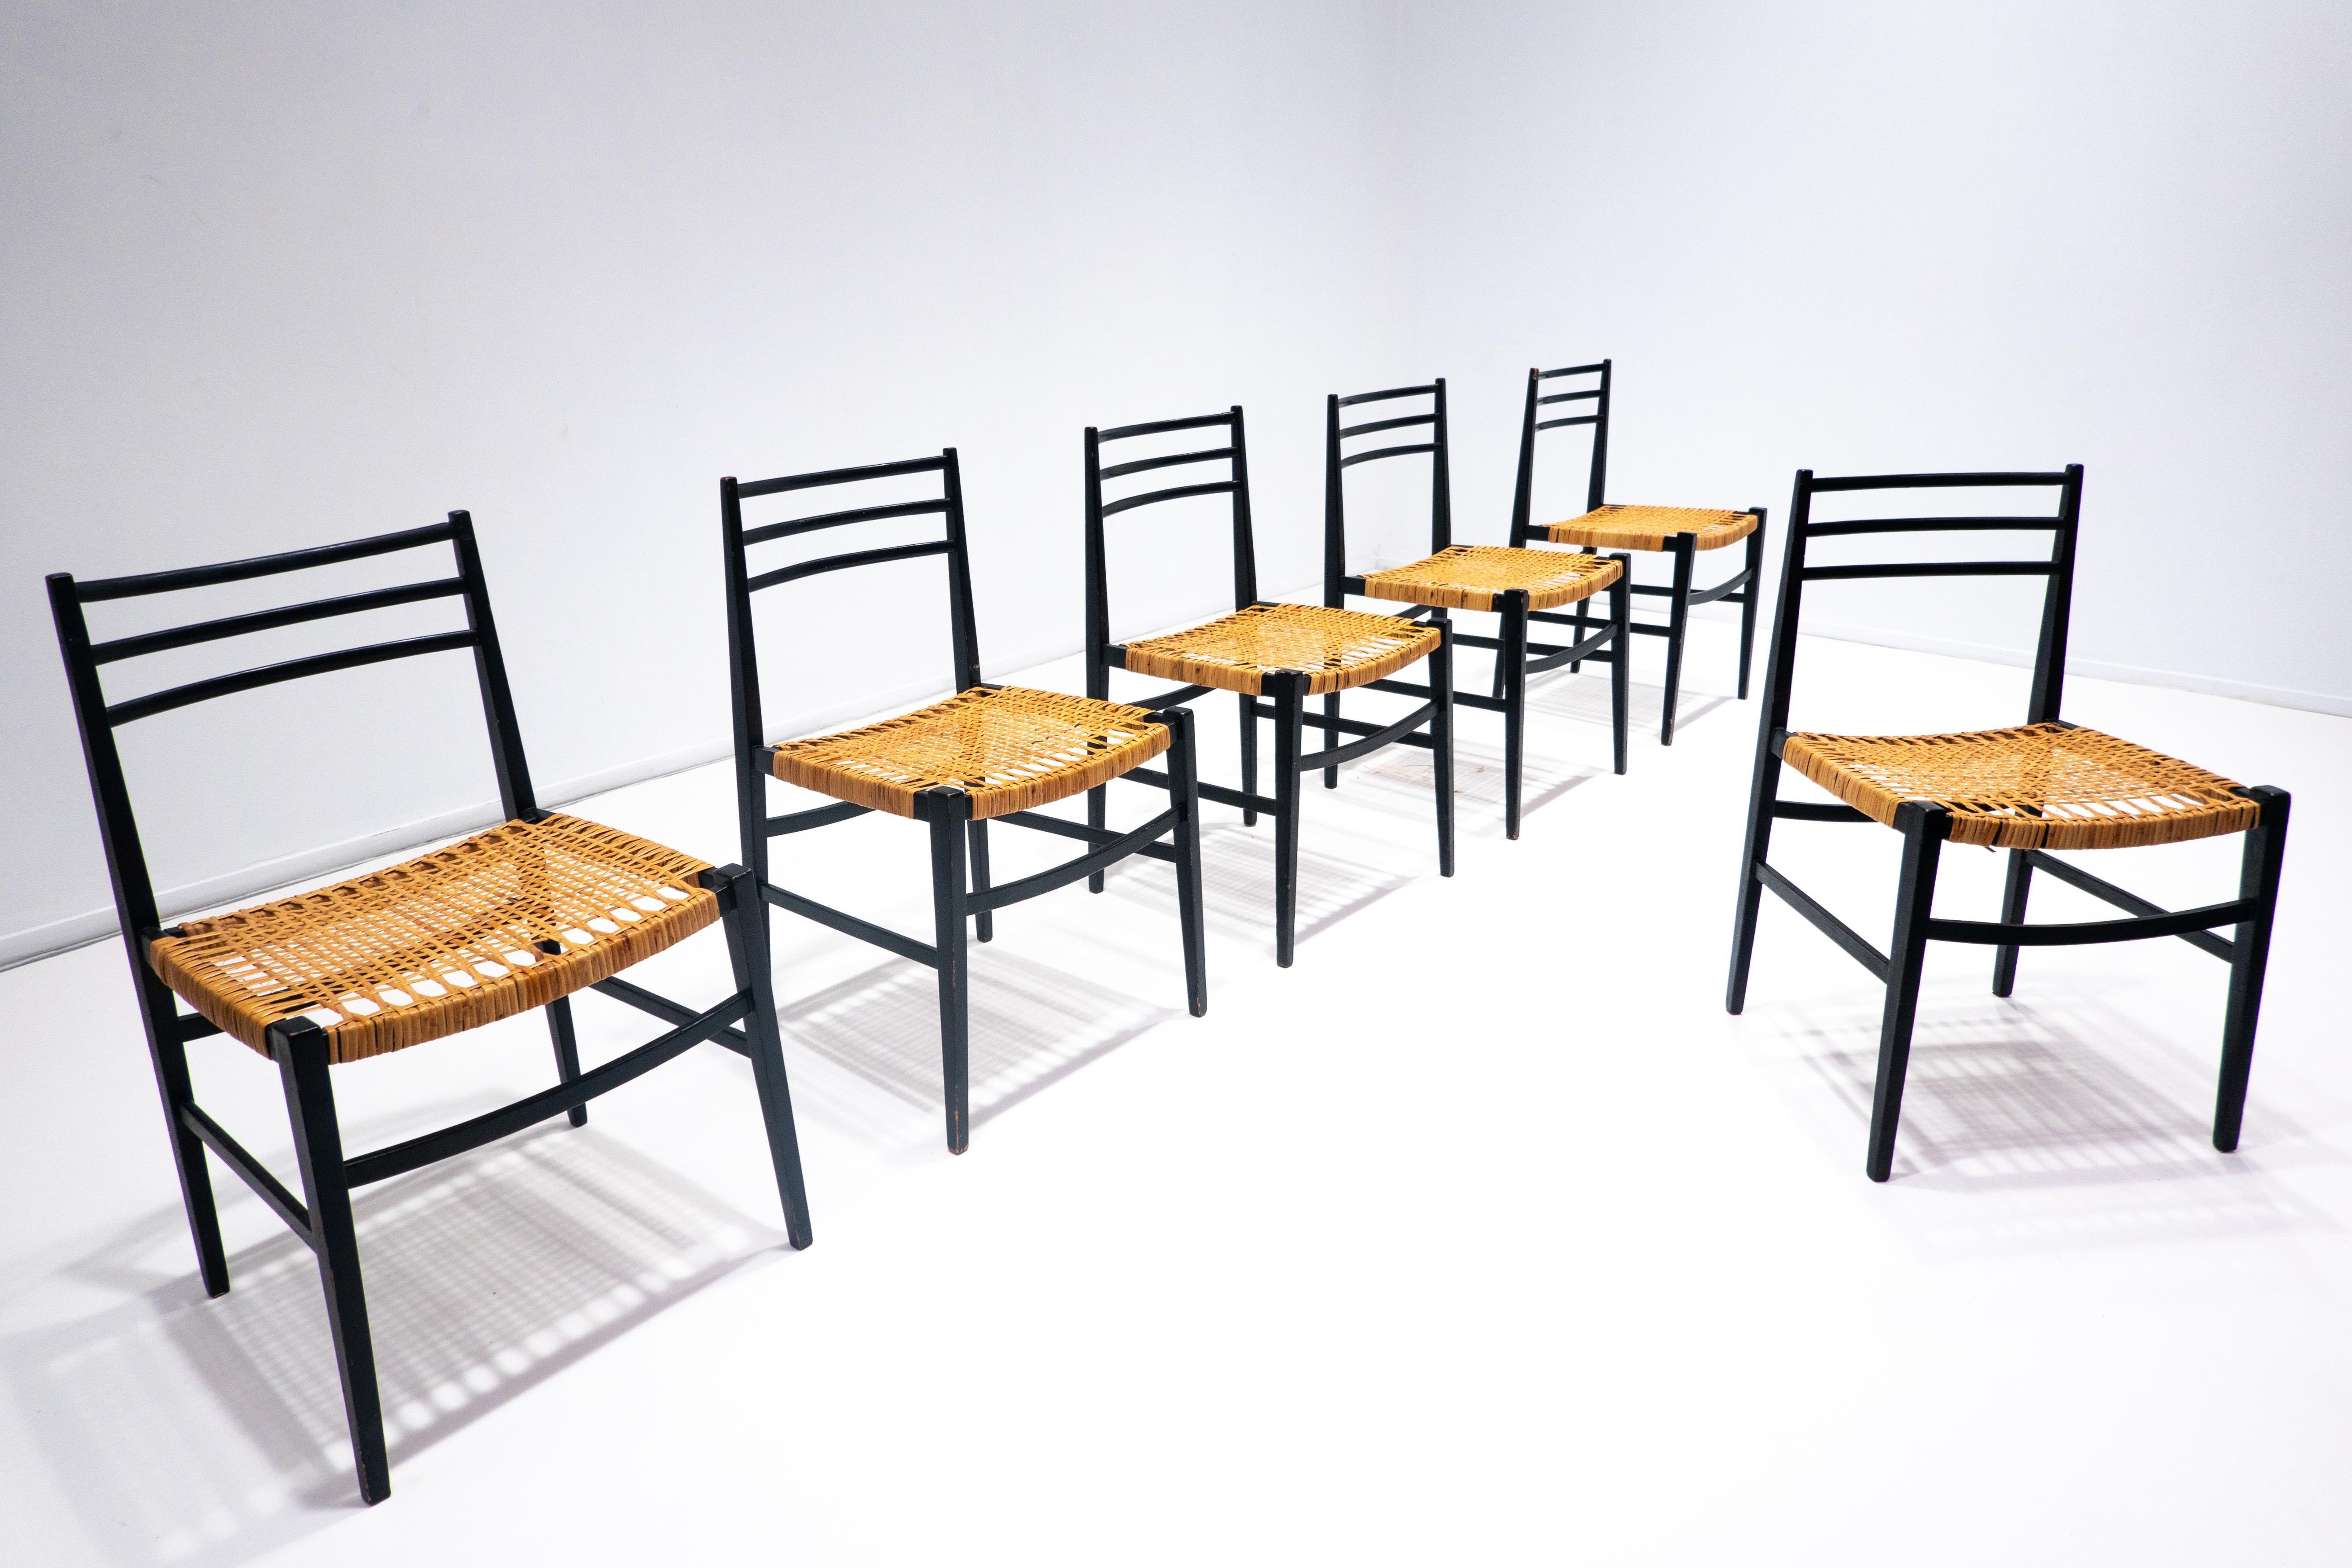 Mid-Century Modern set of 6 dining chairs, wood and raffia rope, Italy, 1960s.